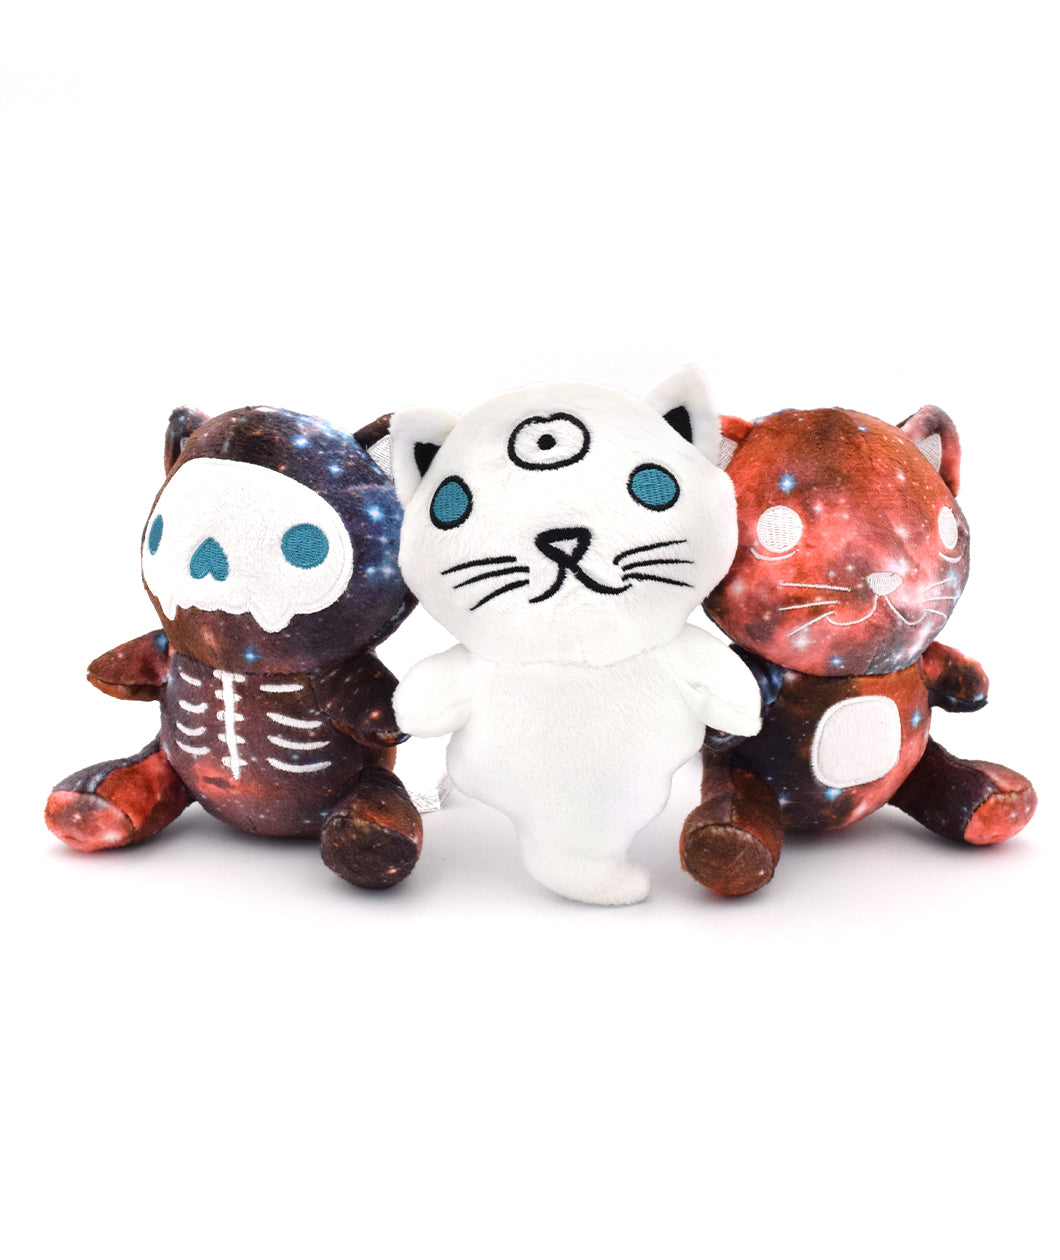 All three Schrodinger's Cat Blind Box possibilities shown together. The dead galactic cat, quantum cat, and living galactic cat.